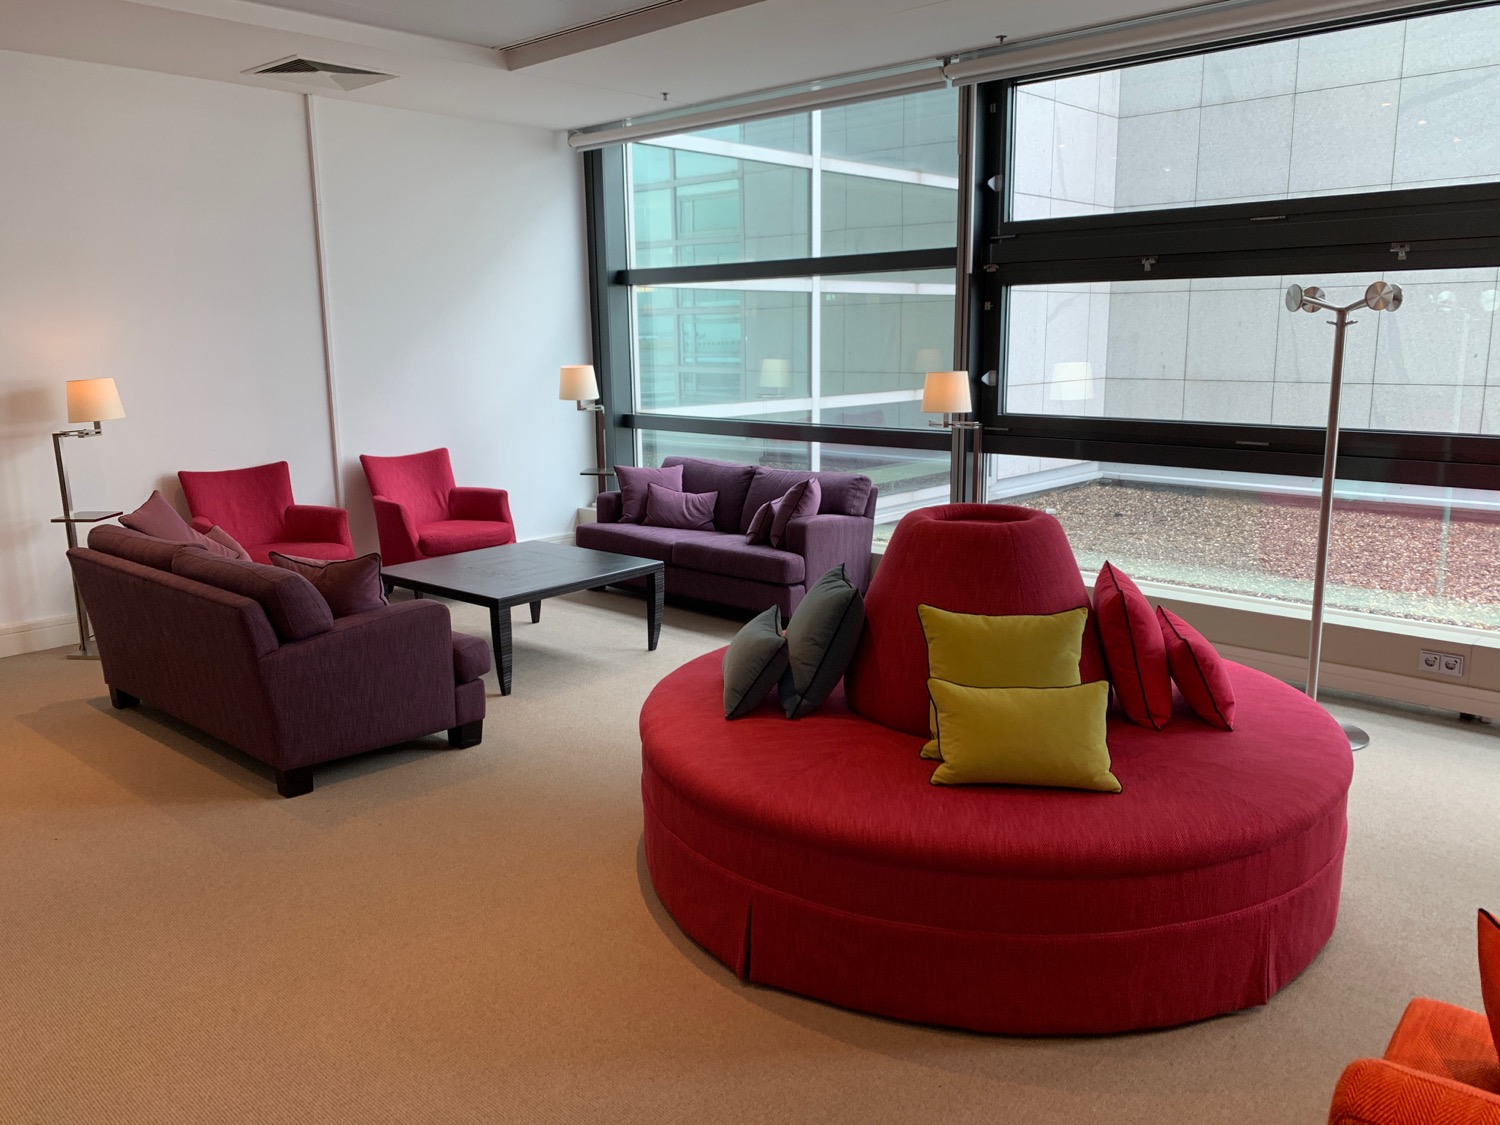 a room with a red couch and purple chairs